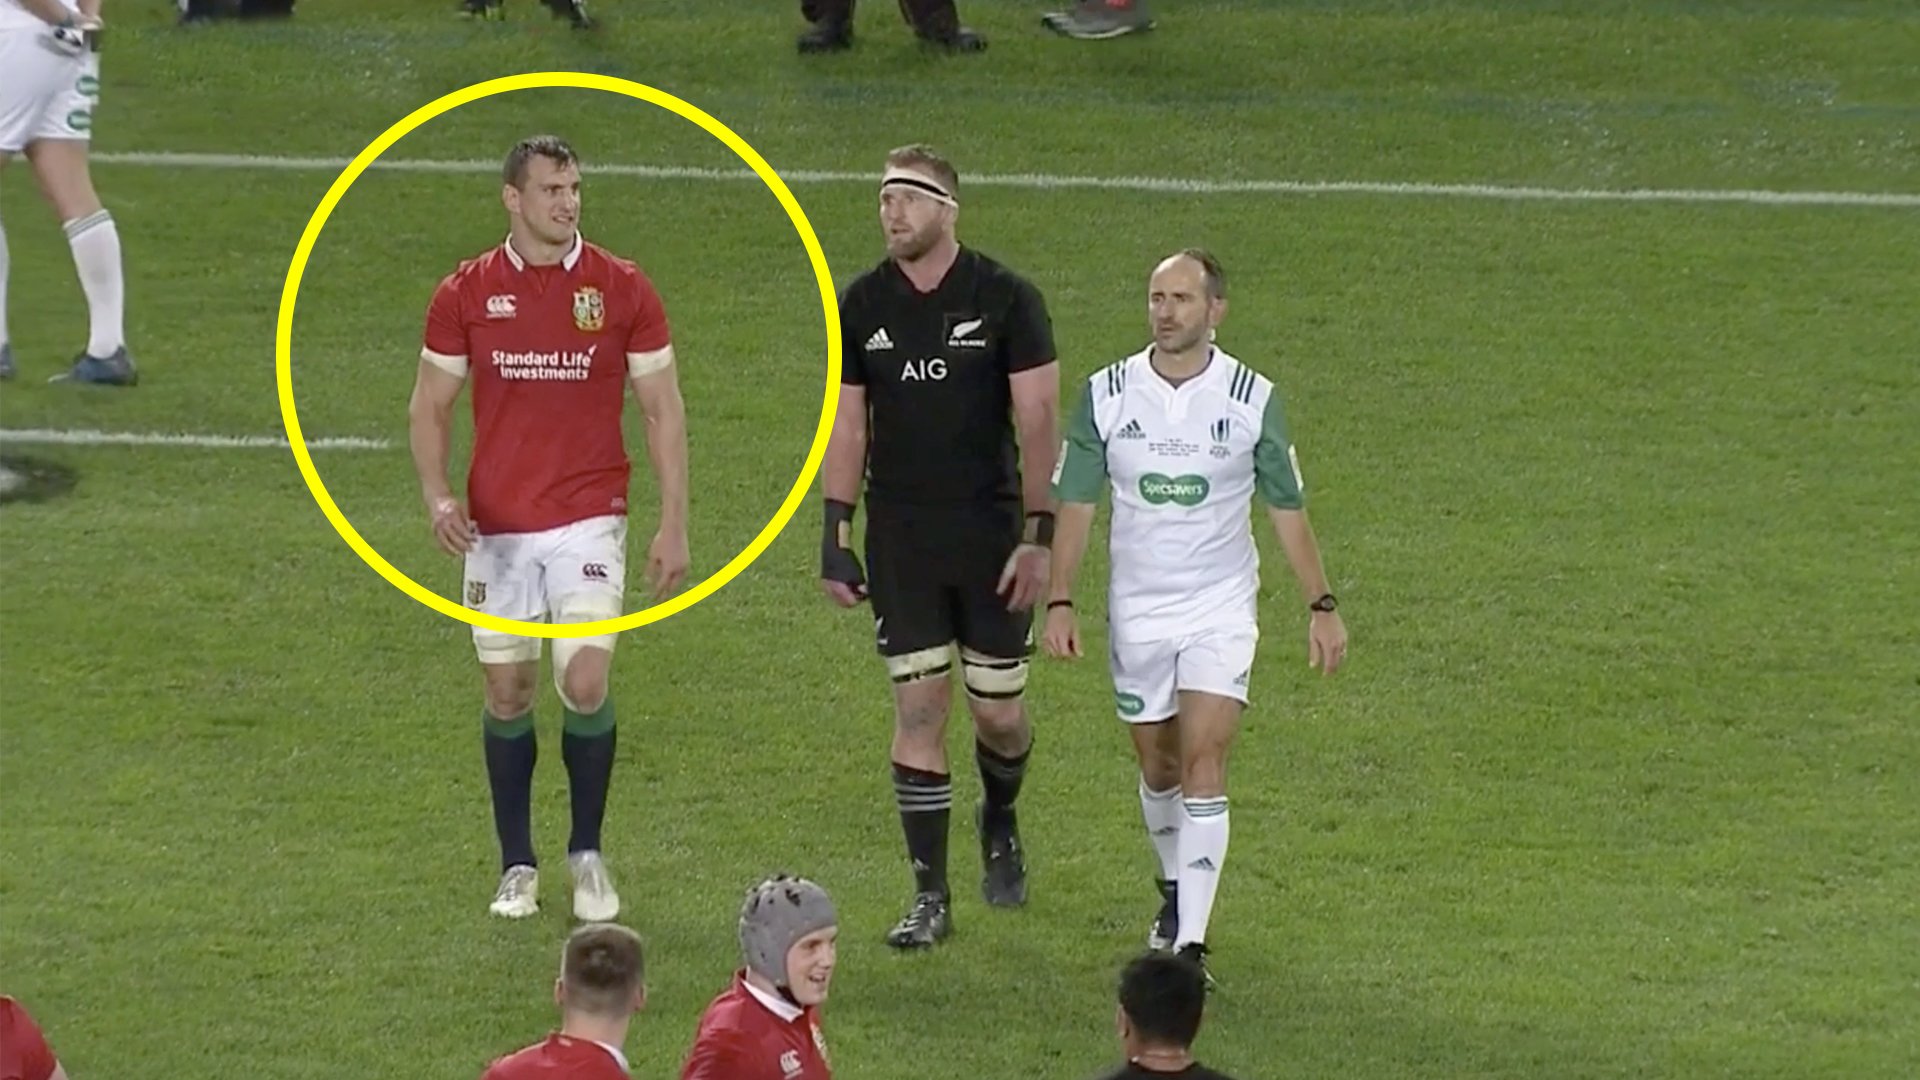 New video reveals how Sam Warburton influenced referee in final moments to save Lions Series